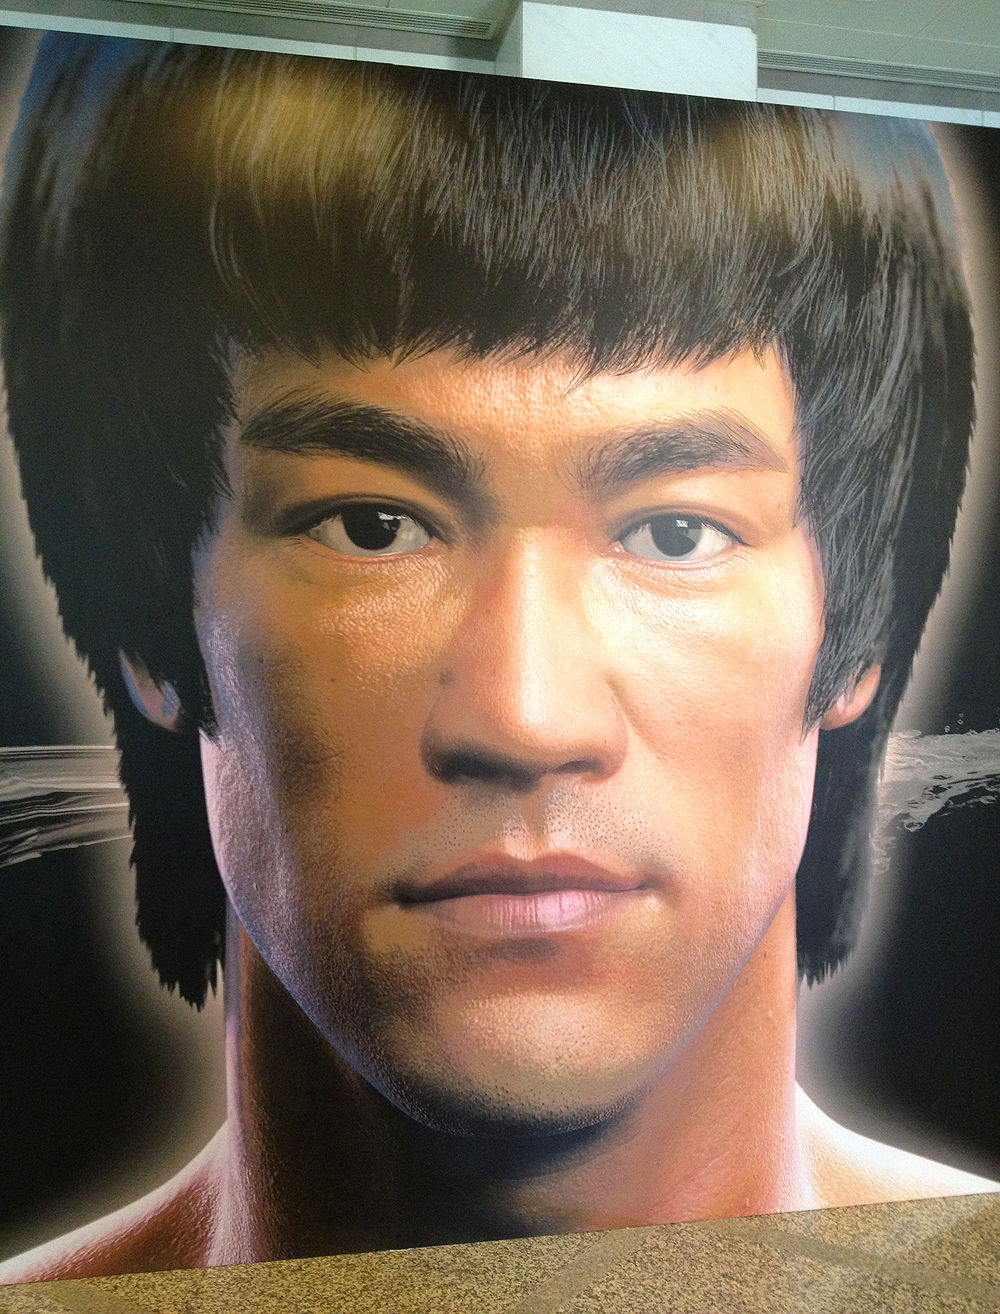 Bruce Lee exhibition at Hong Kong Heritage Museum opens!